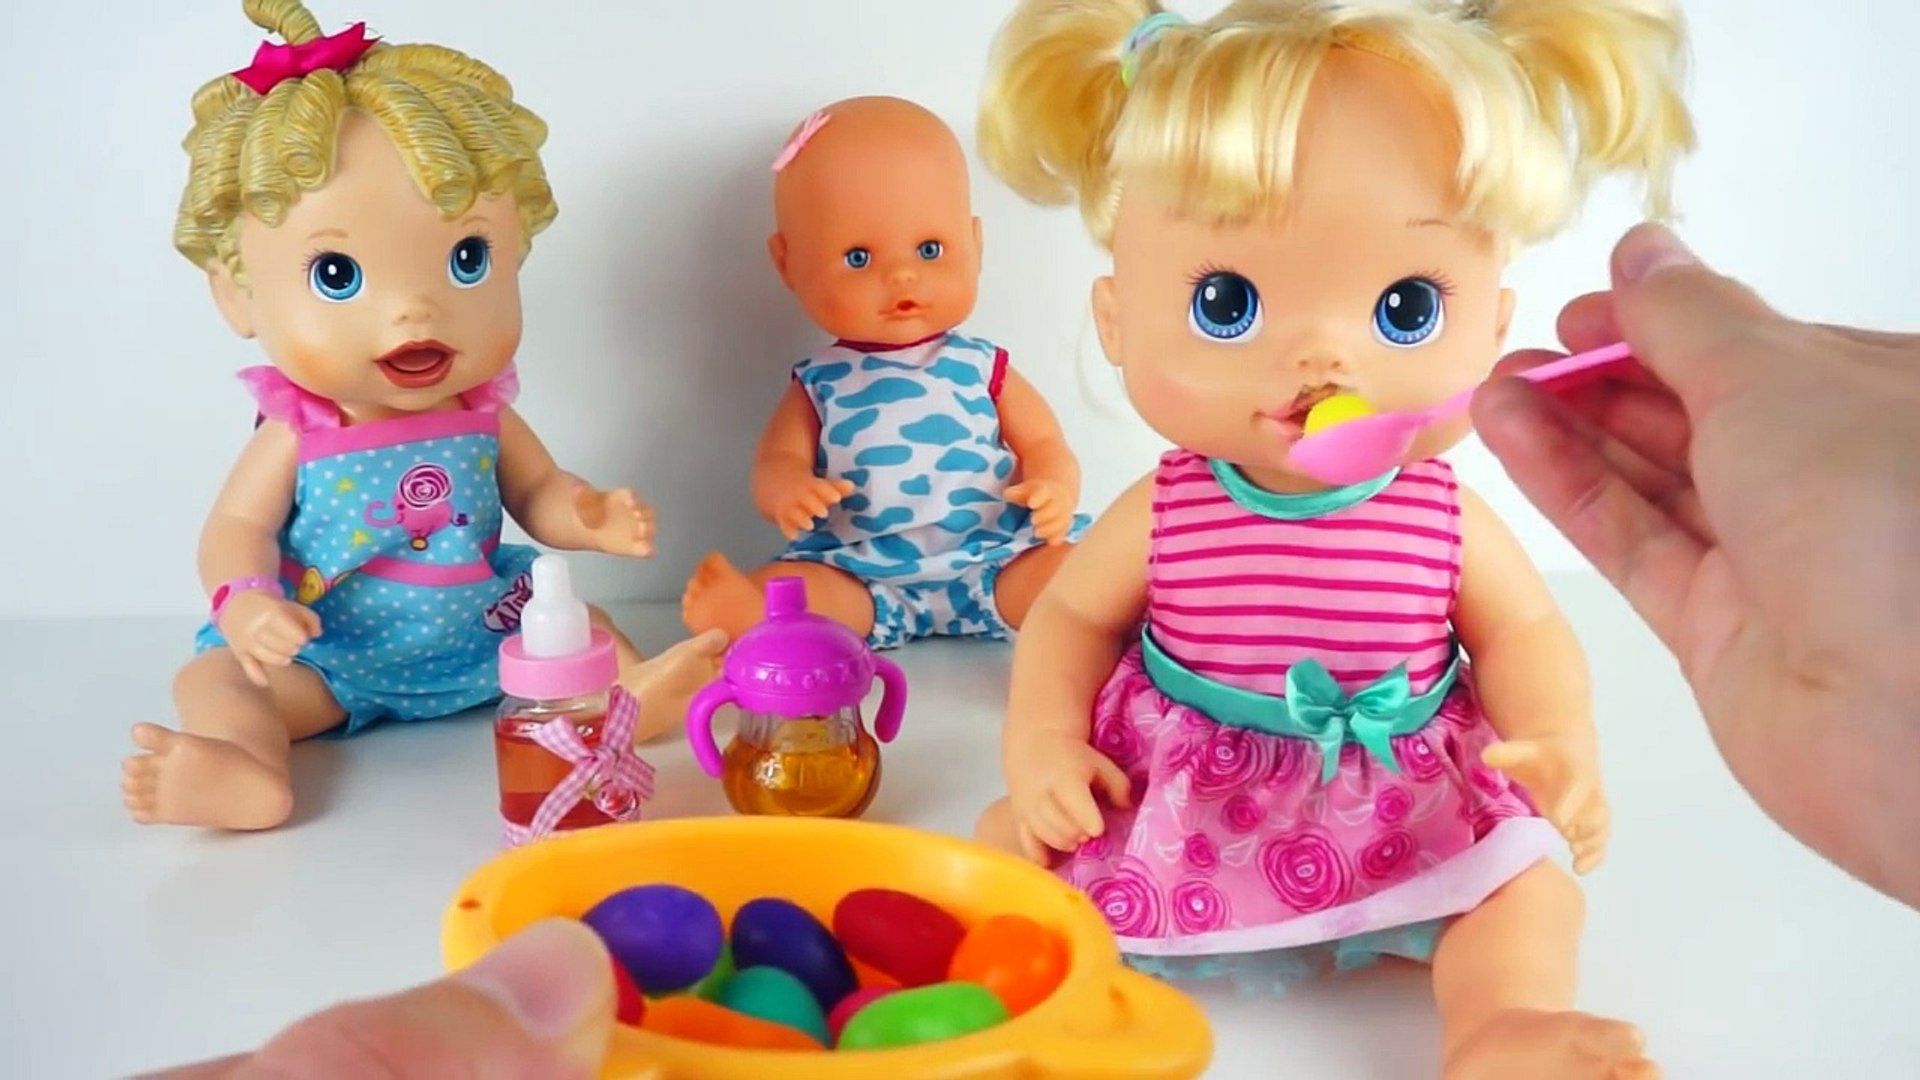 BABY ALIVE Doll Potty Training Poop Like In Real Life Funny Kids Video Toys Channel